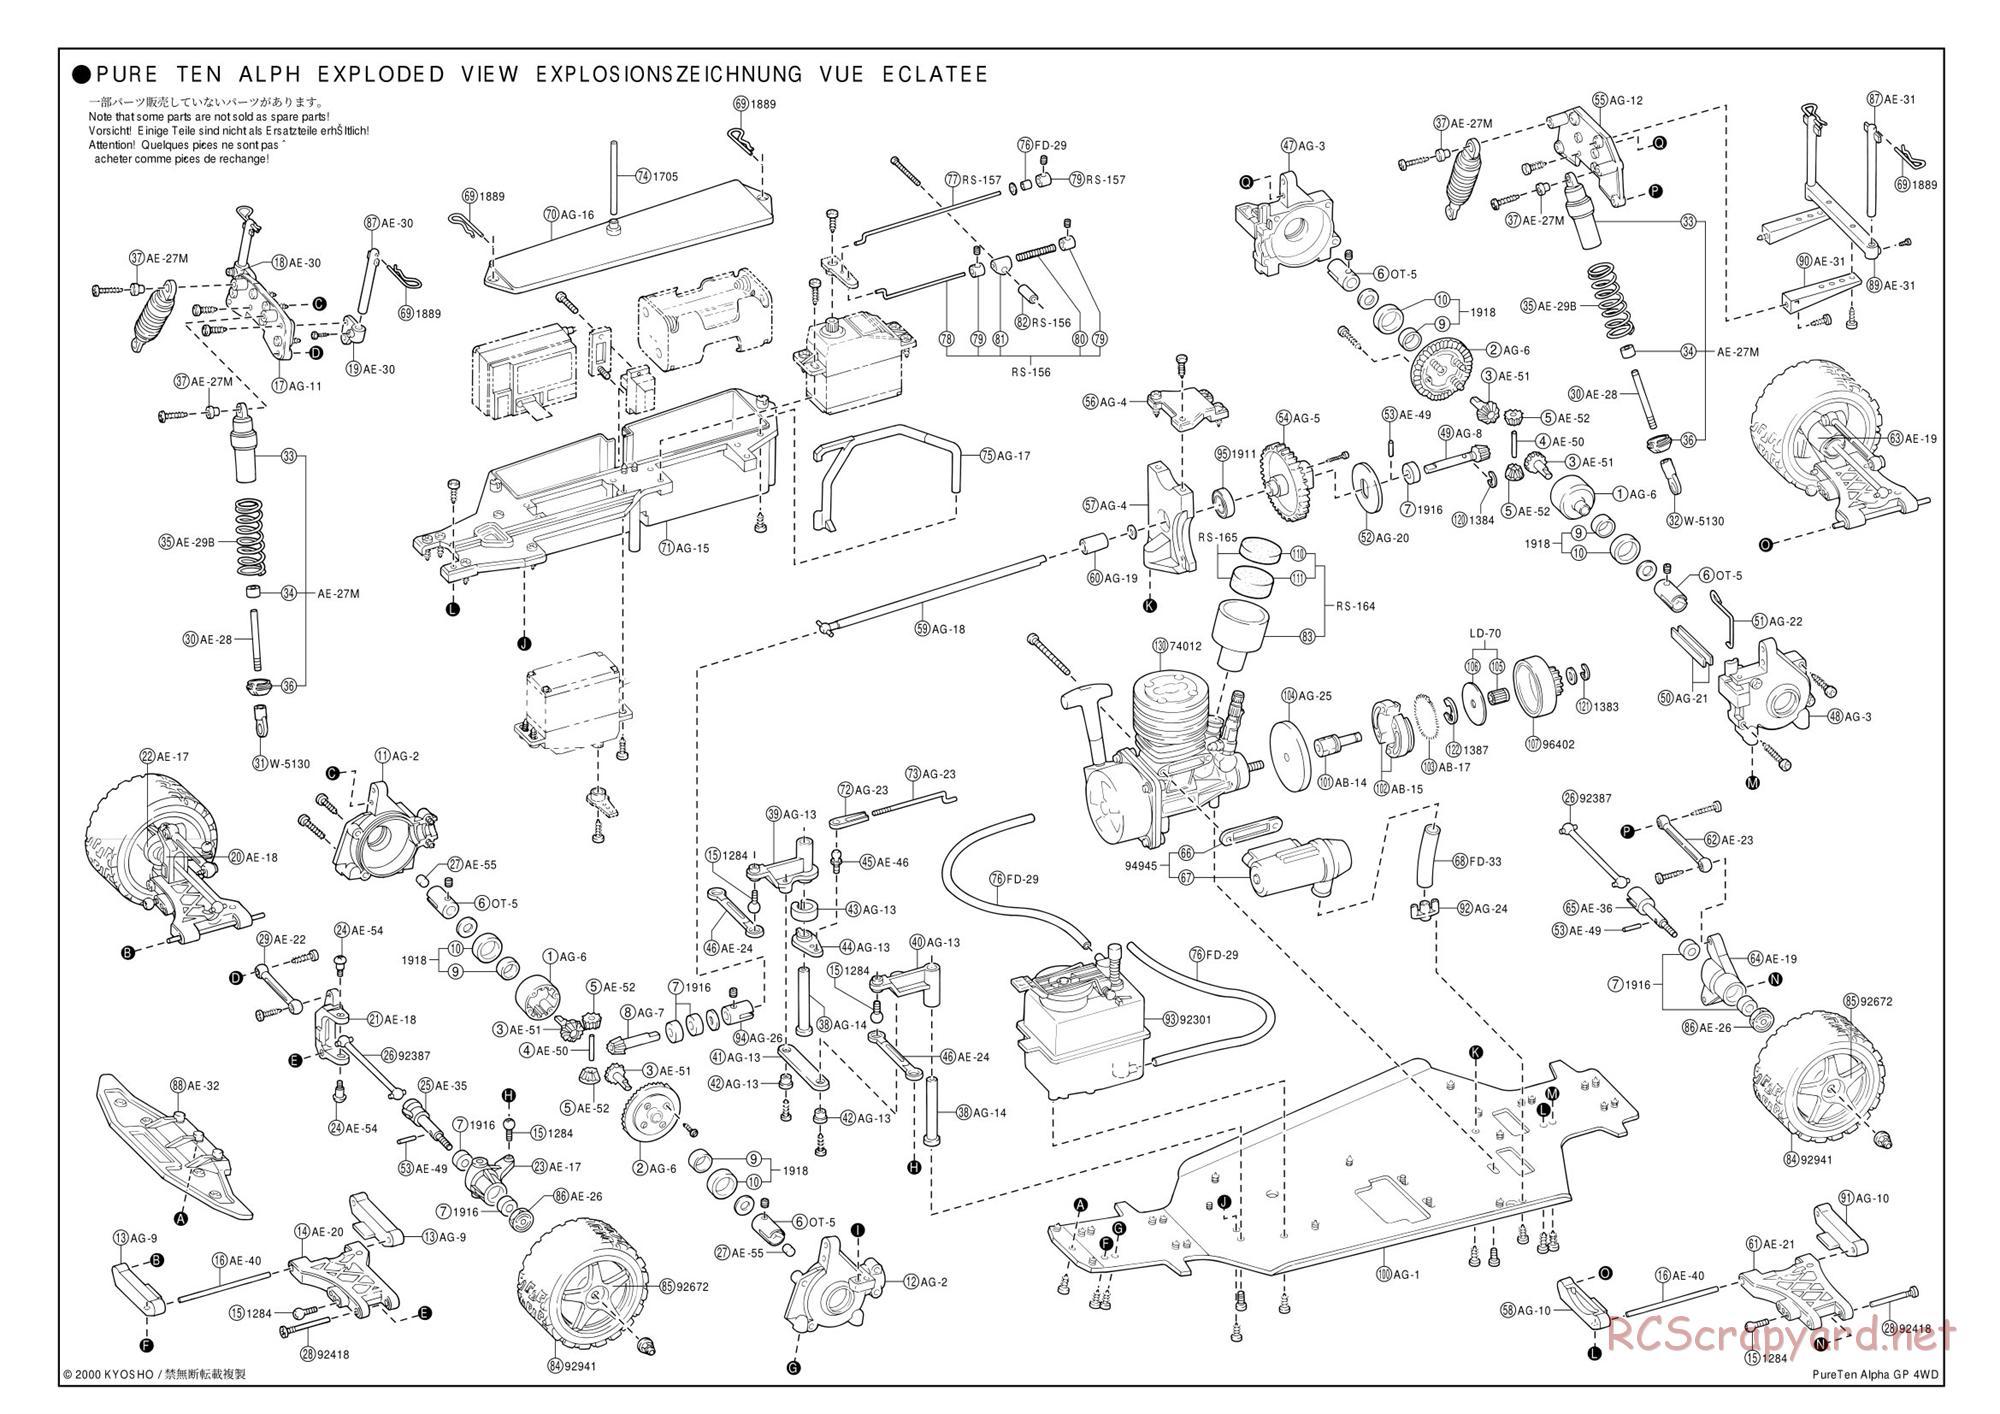 Kyosho - PureTen GP Alpha - Exploded Views - Page 1